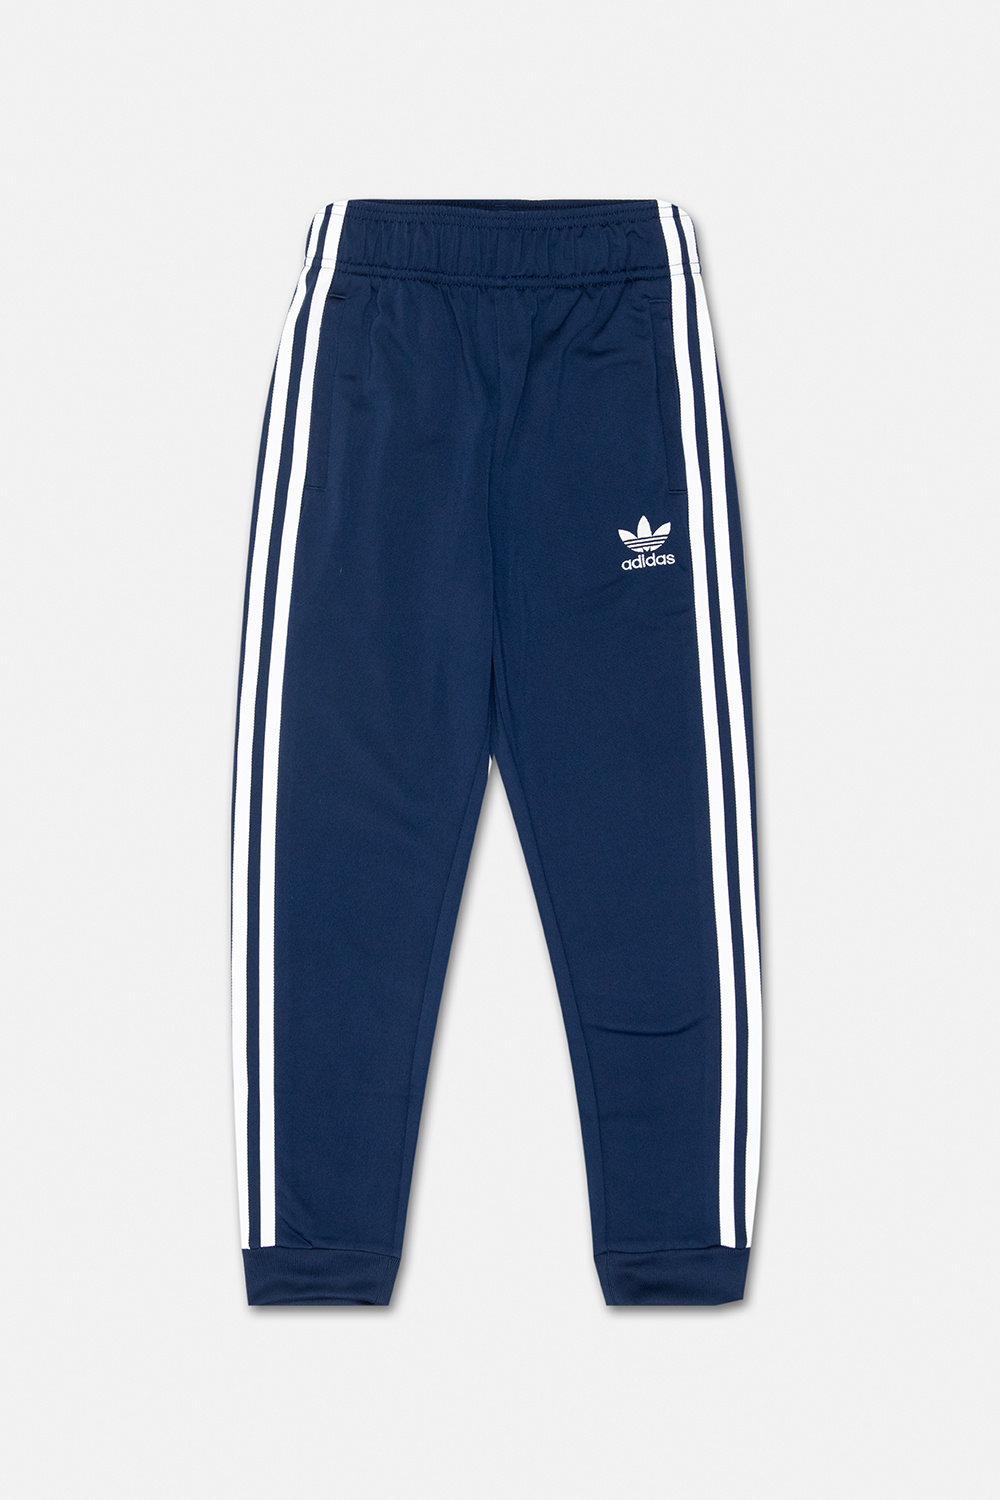 adidas gram Kids Trousers with logo